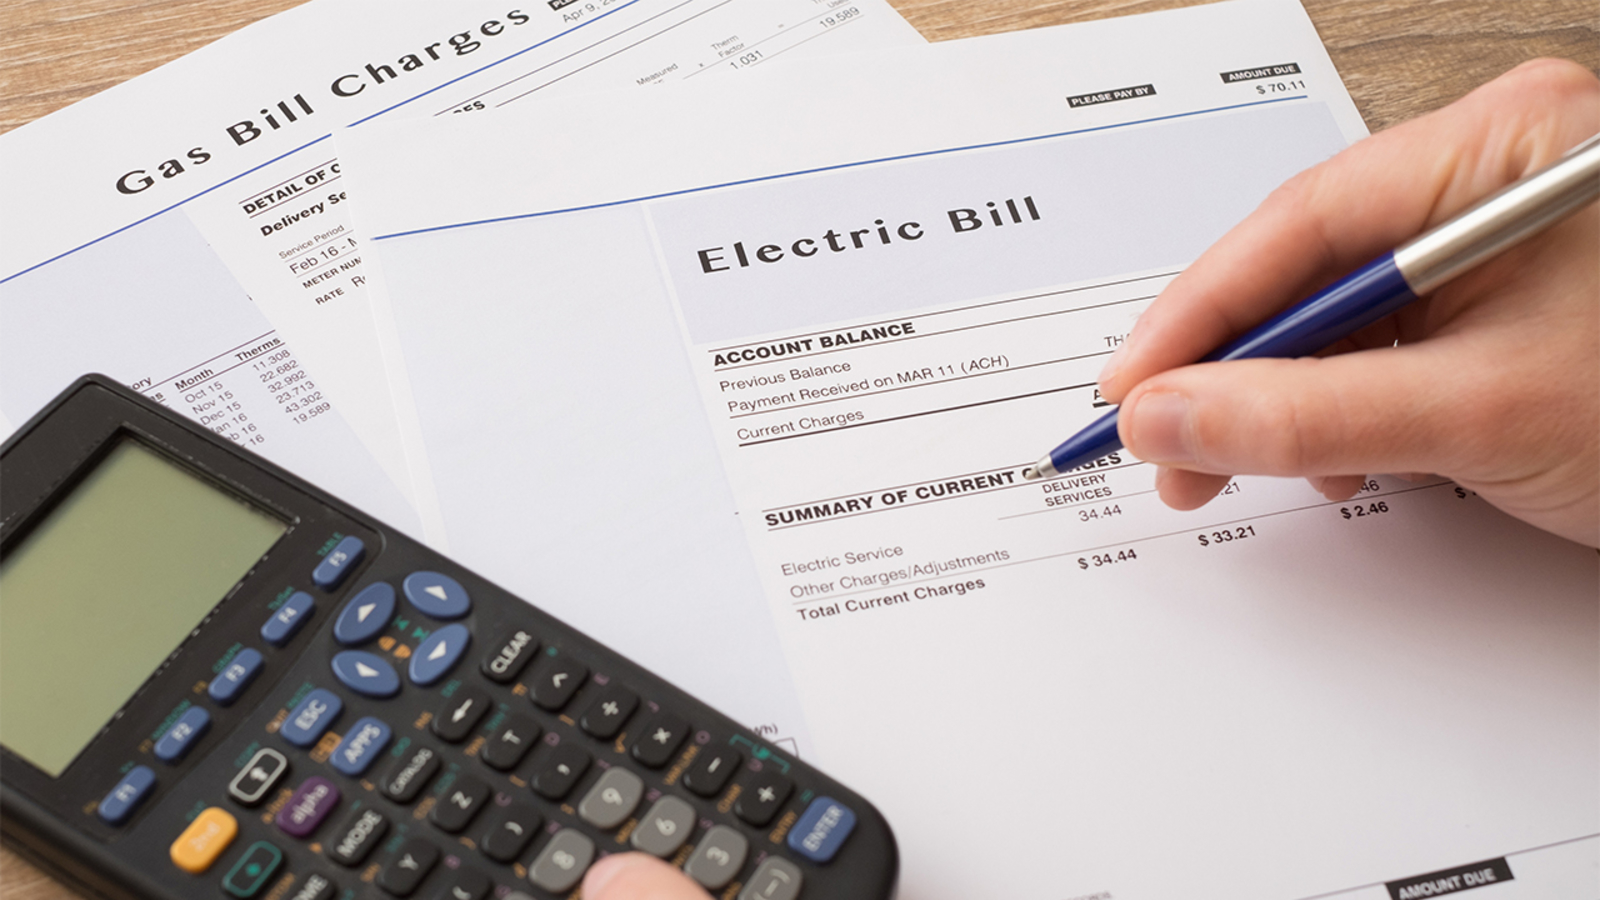 Electric bill charges paper form on the ta